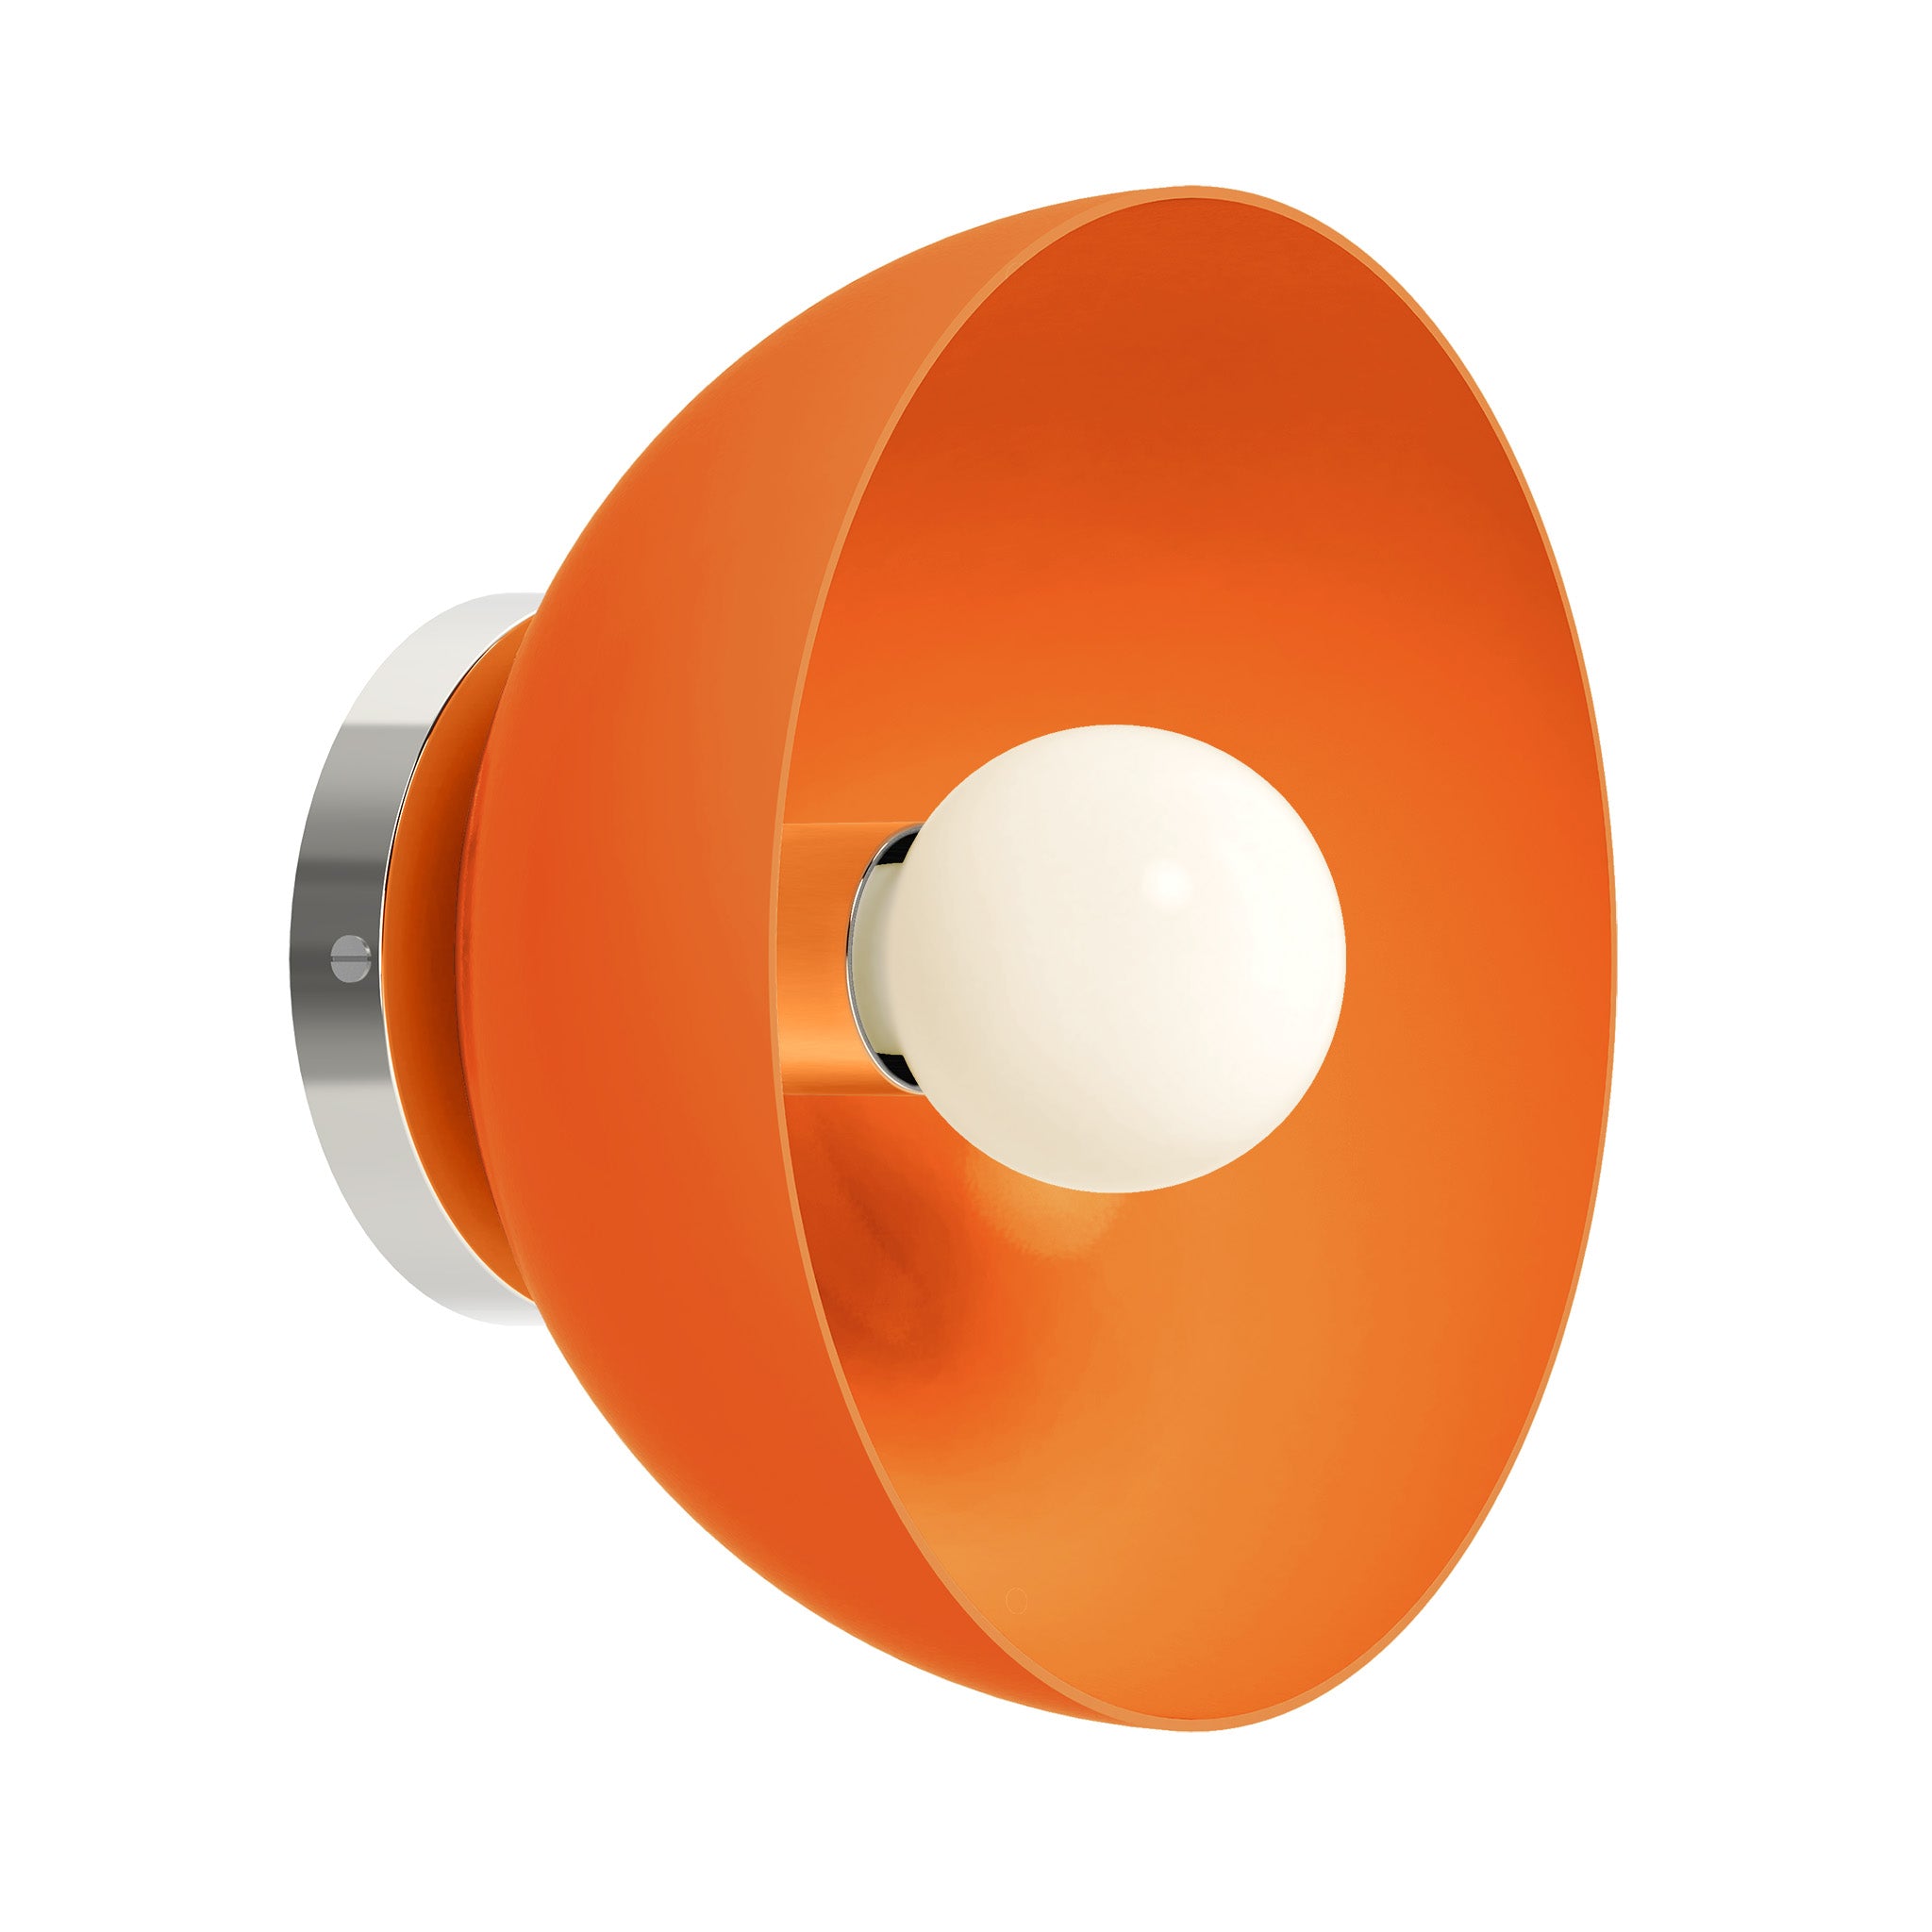 Nickel and orange color hemi dome sconce 10" Dutton Brown lighting